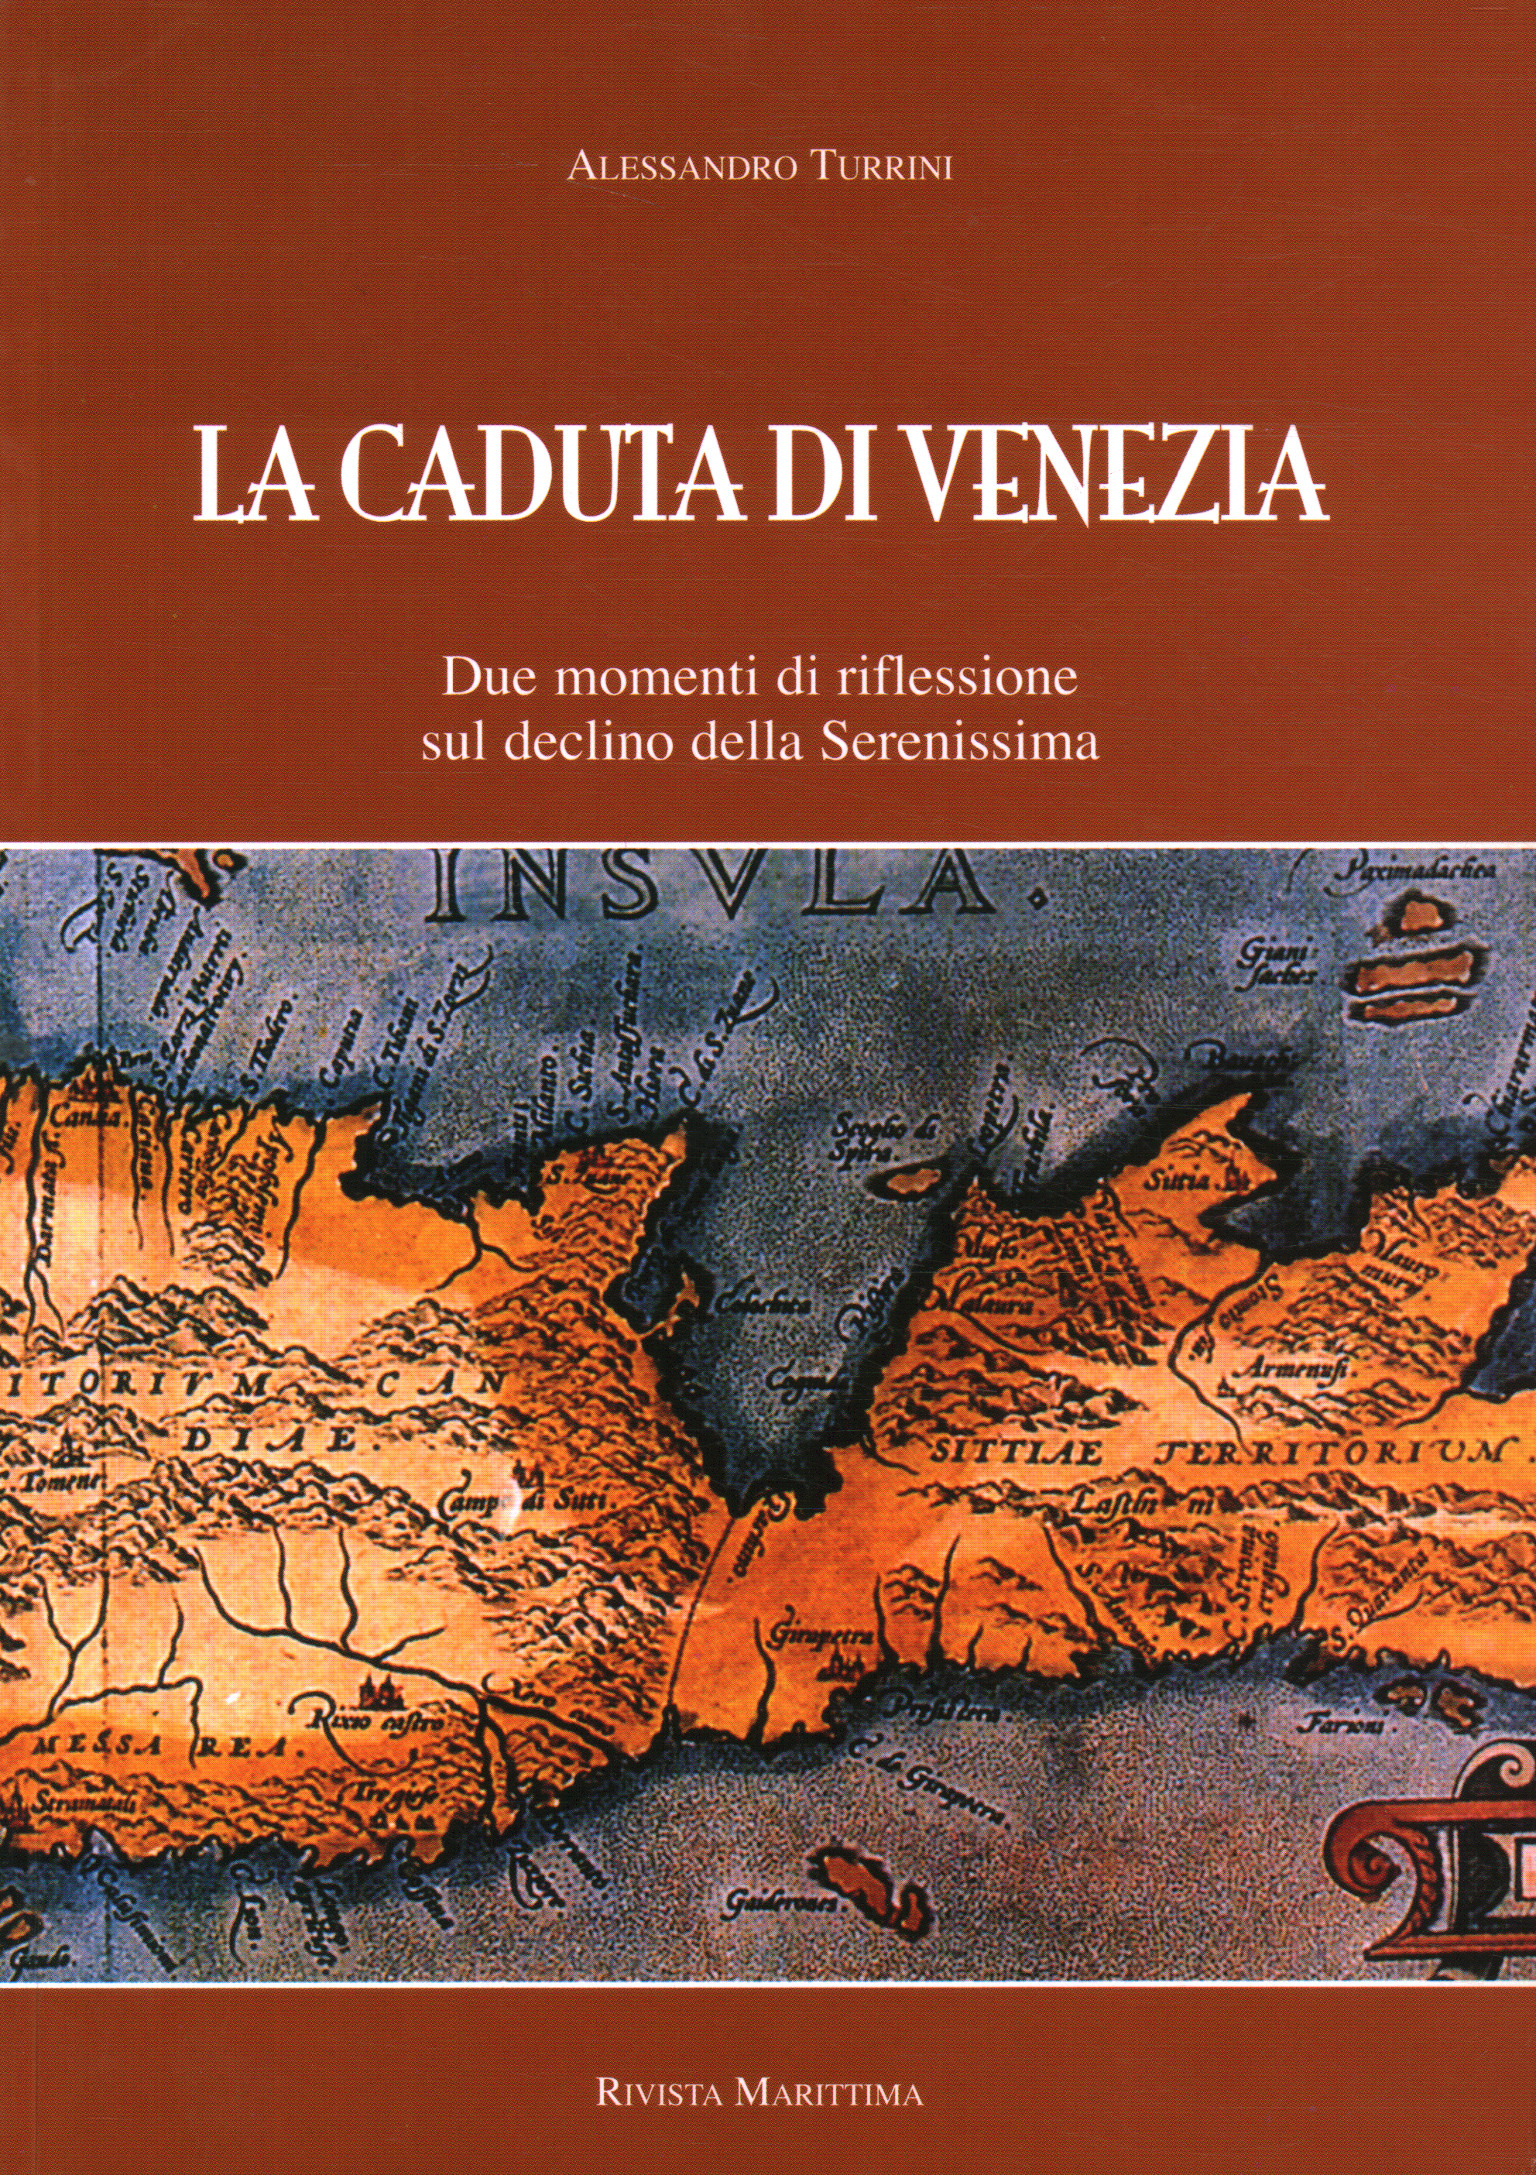 The fall of Venice